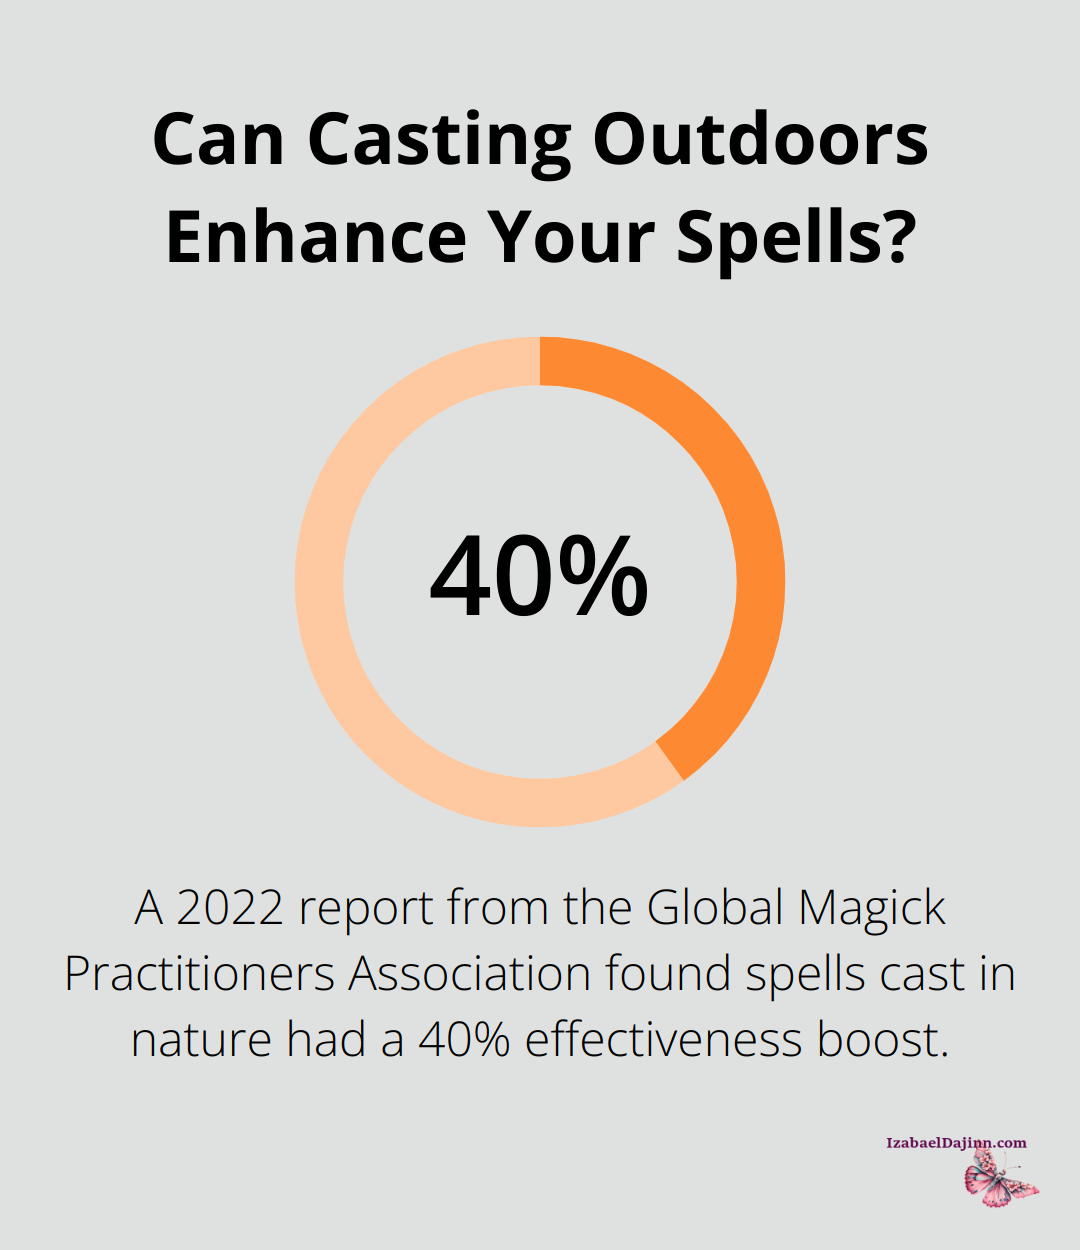 Can Casting Outdoors Enhance Your Spells?